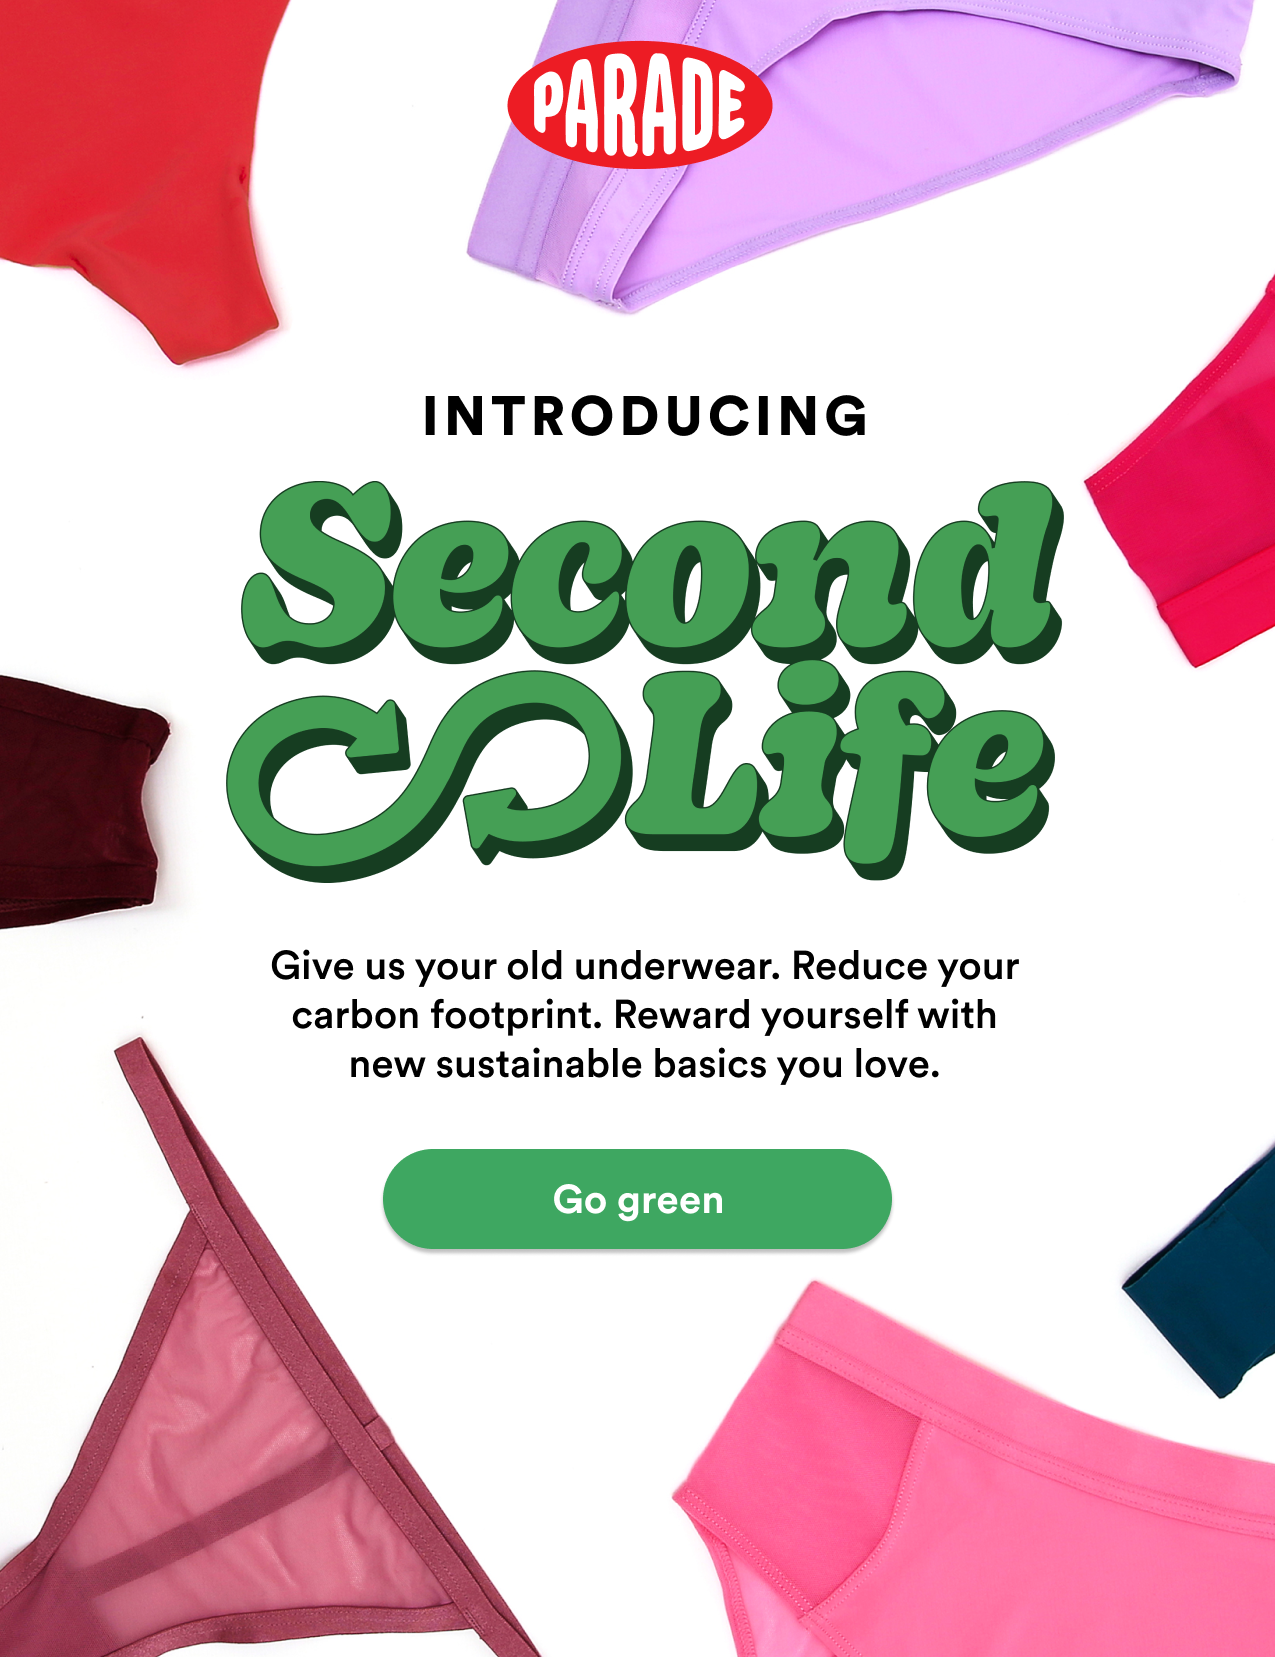 Parade: Introducing Second Life: Our underwear recycling program